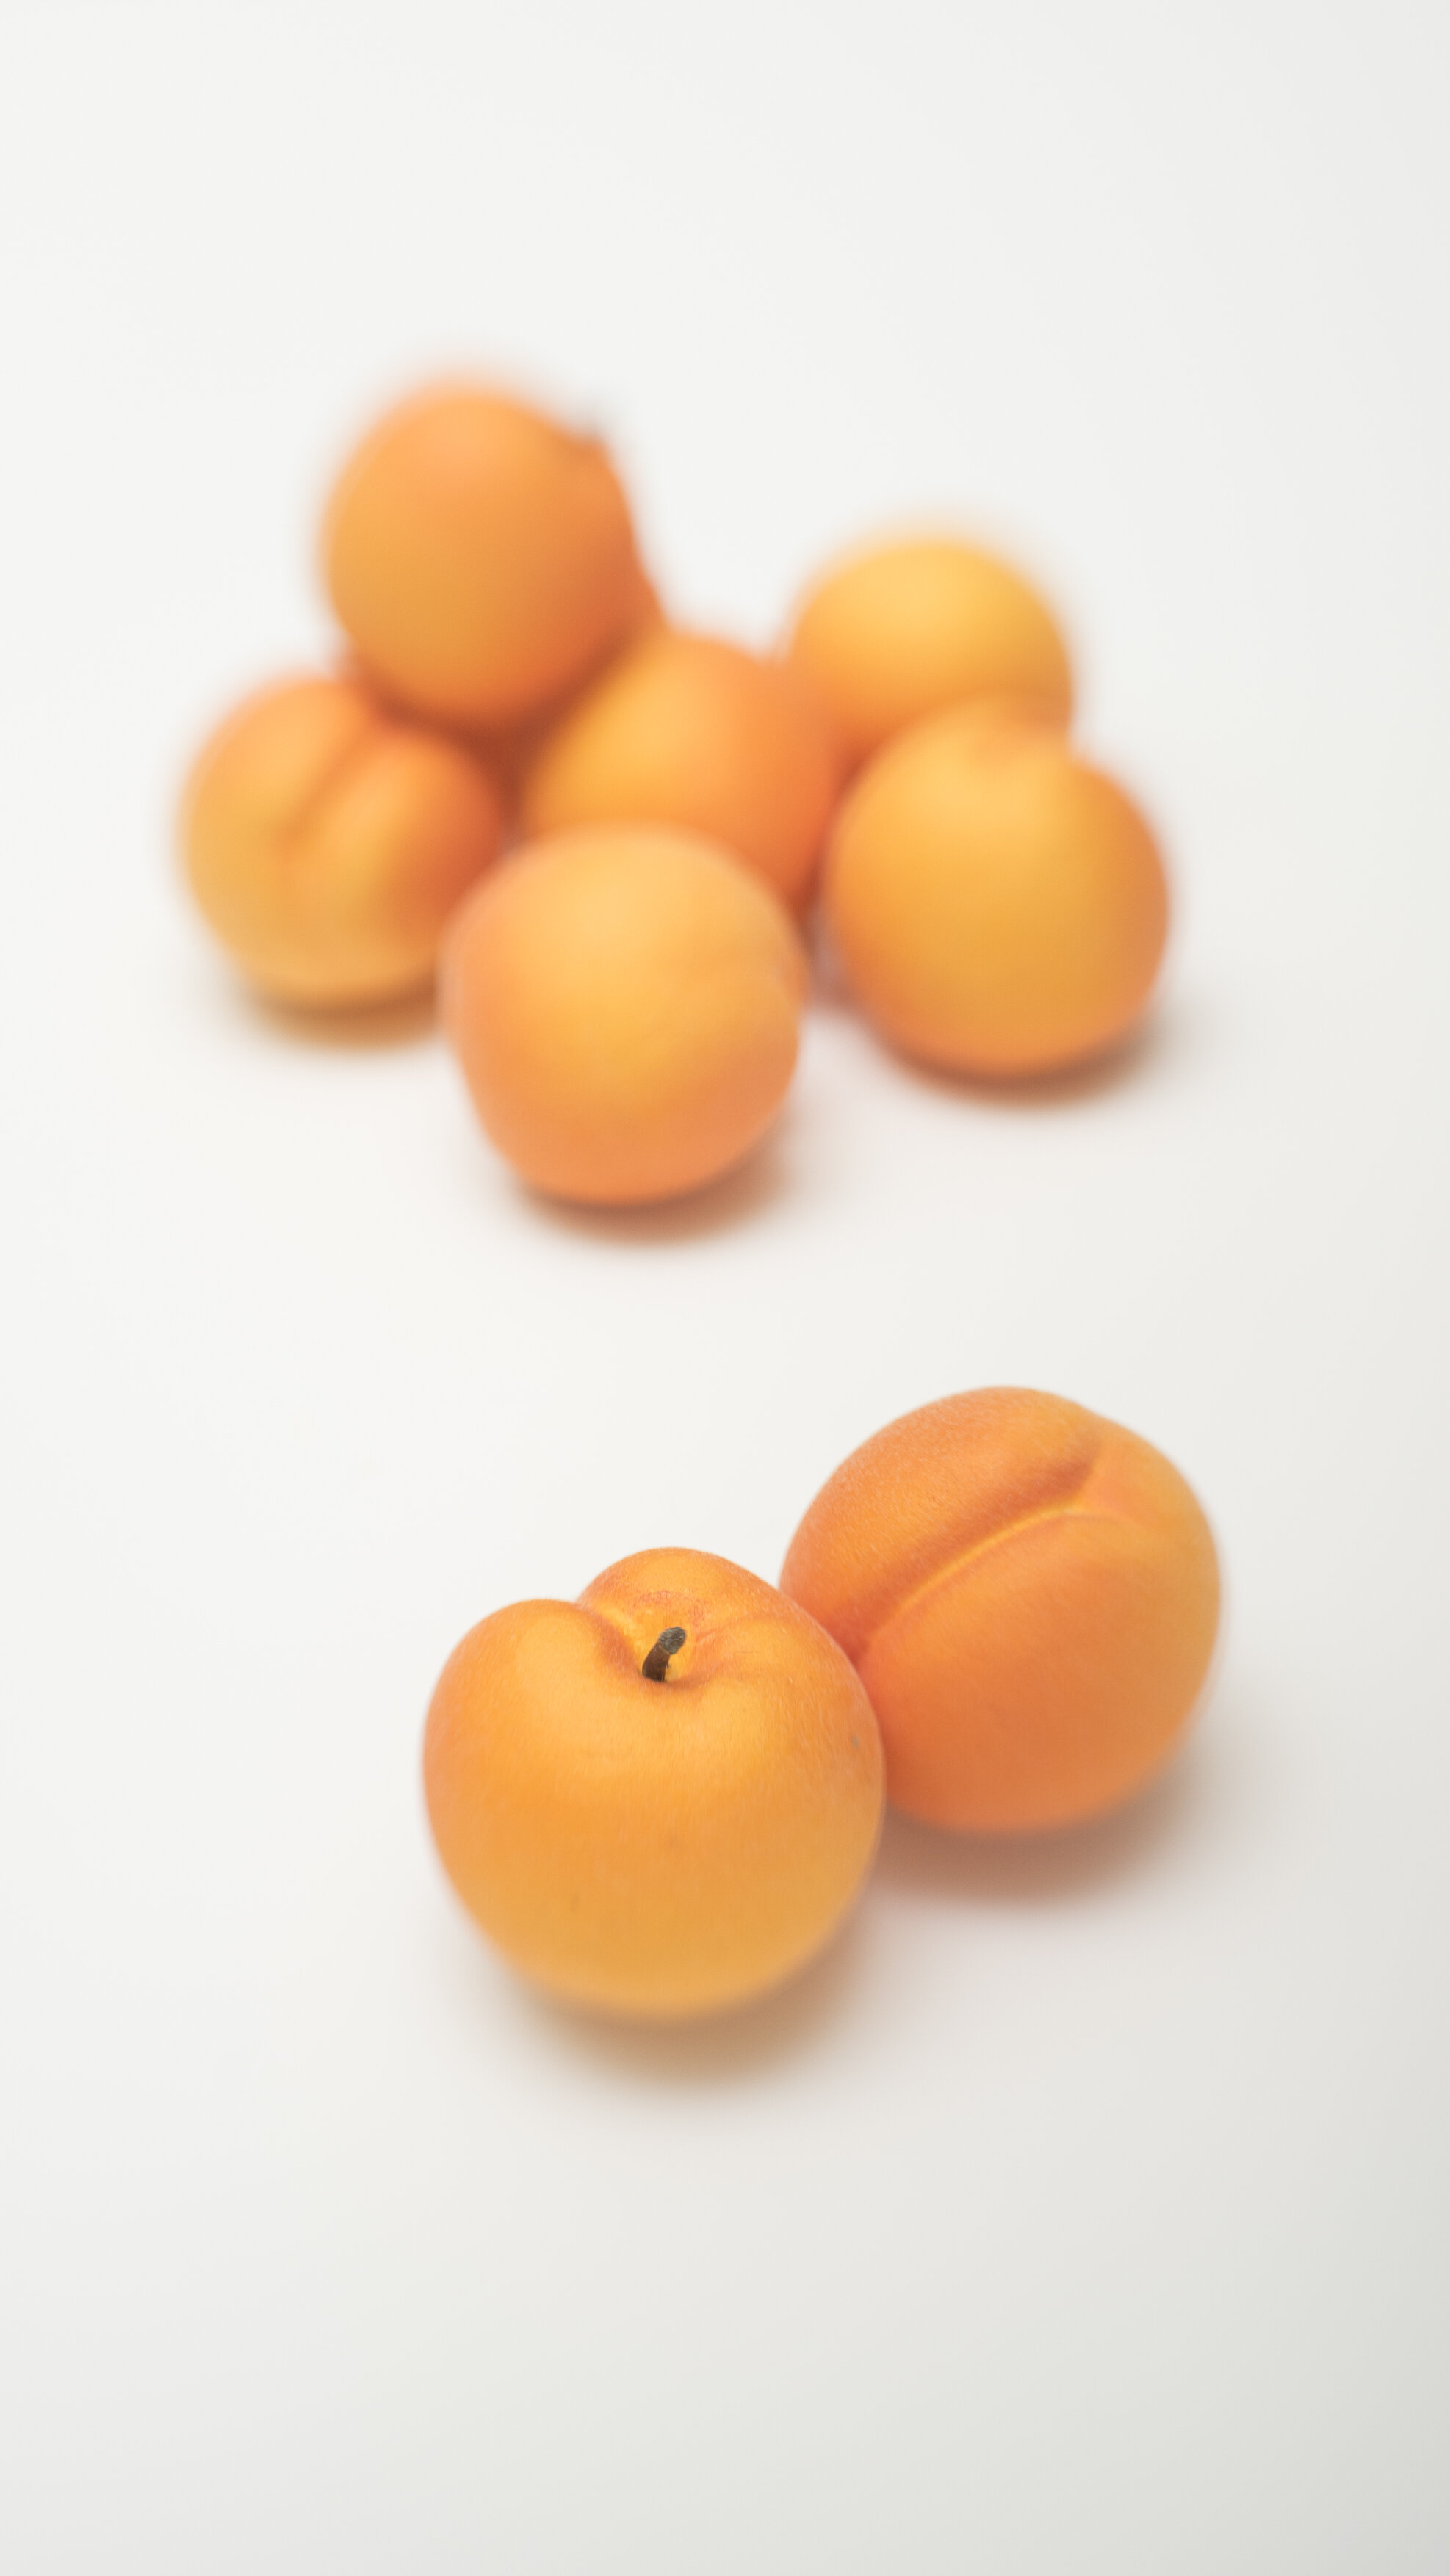 PEACHES WITH LENS LOCKED AND BOKEH BLADES OUT OF FRAME